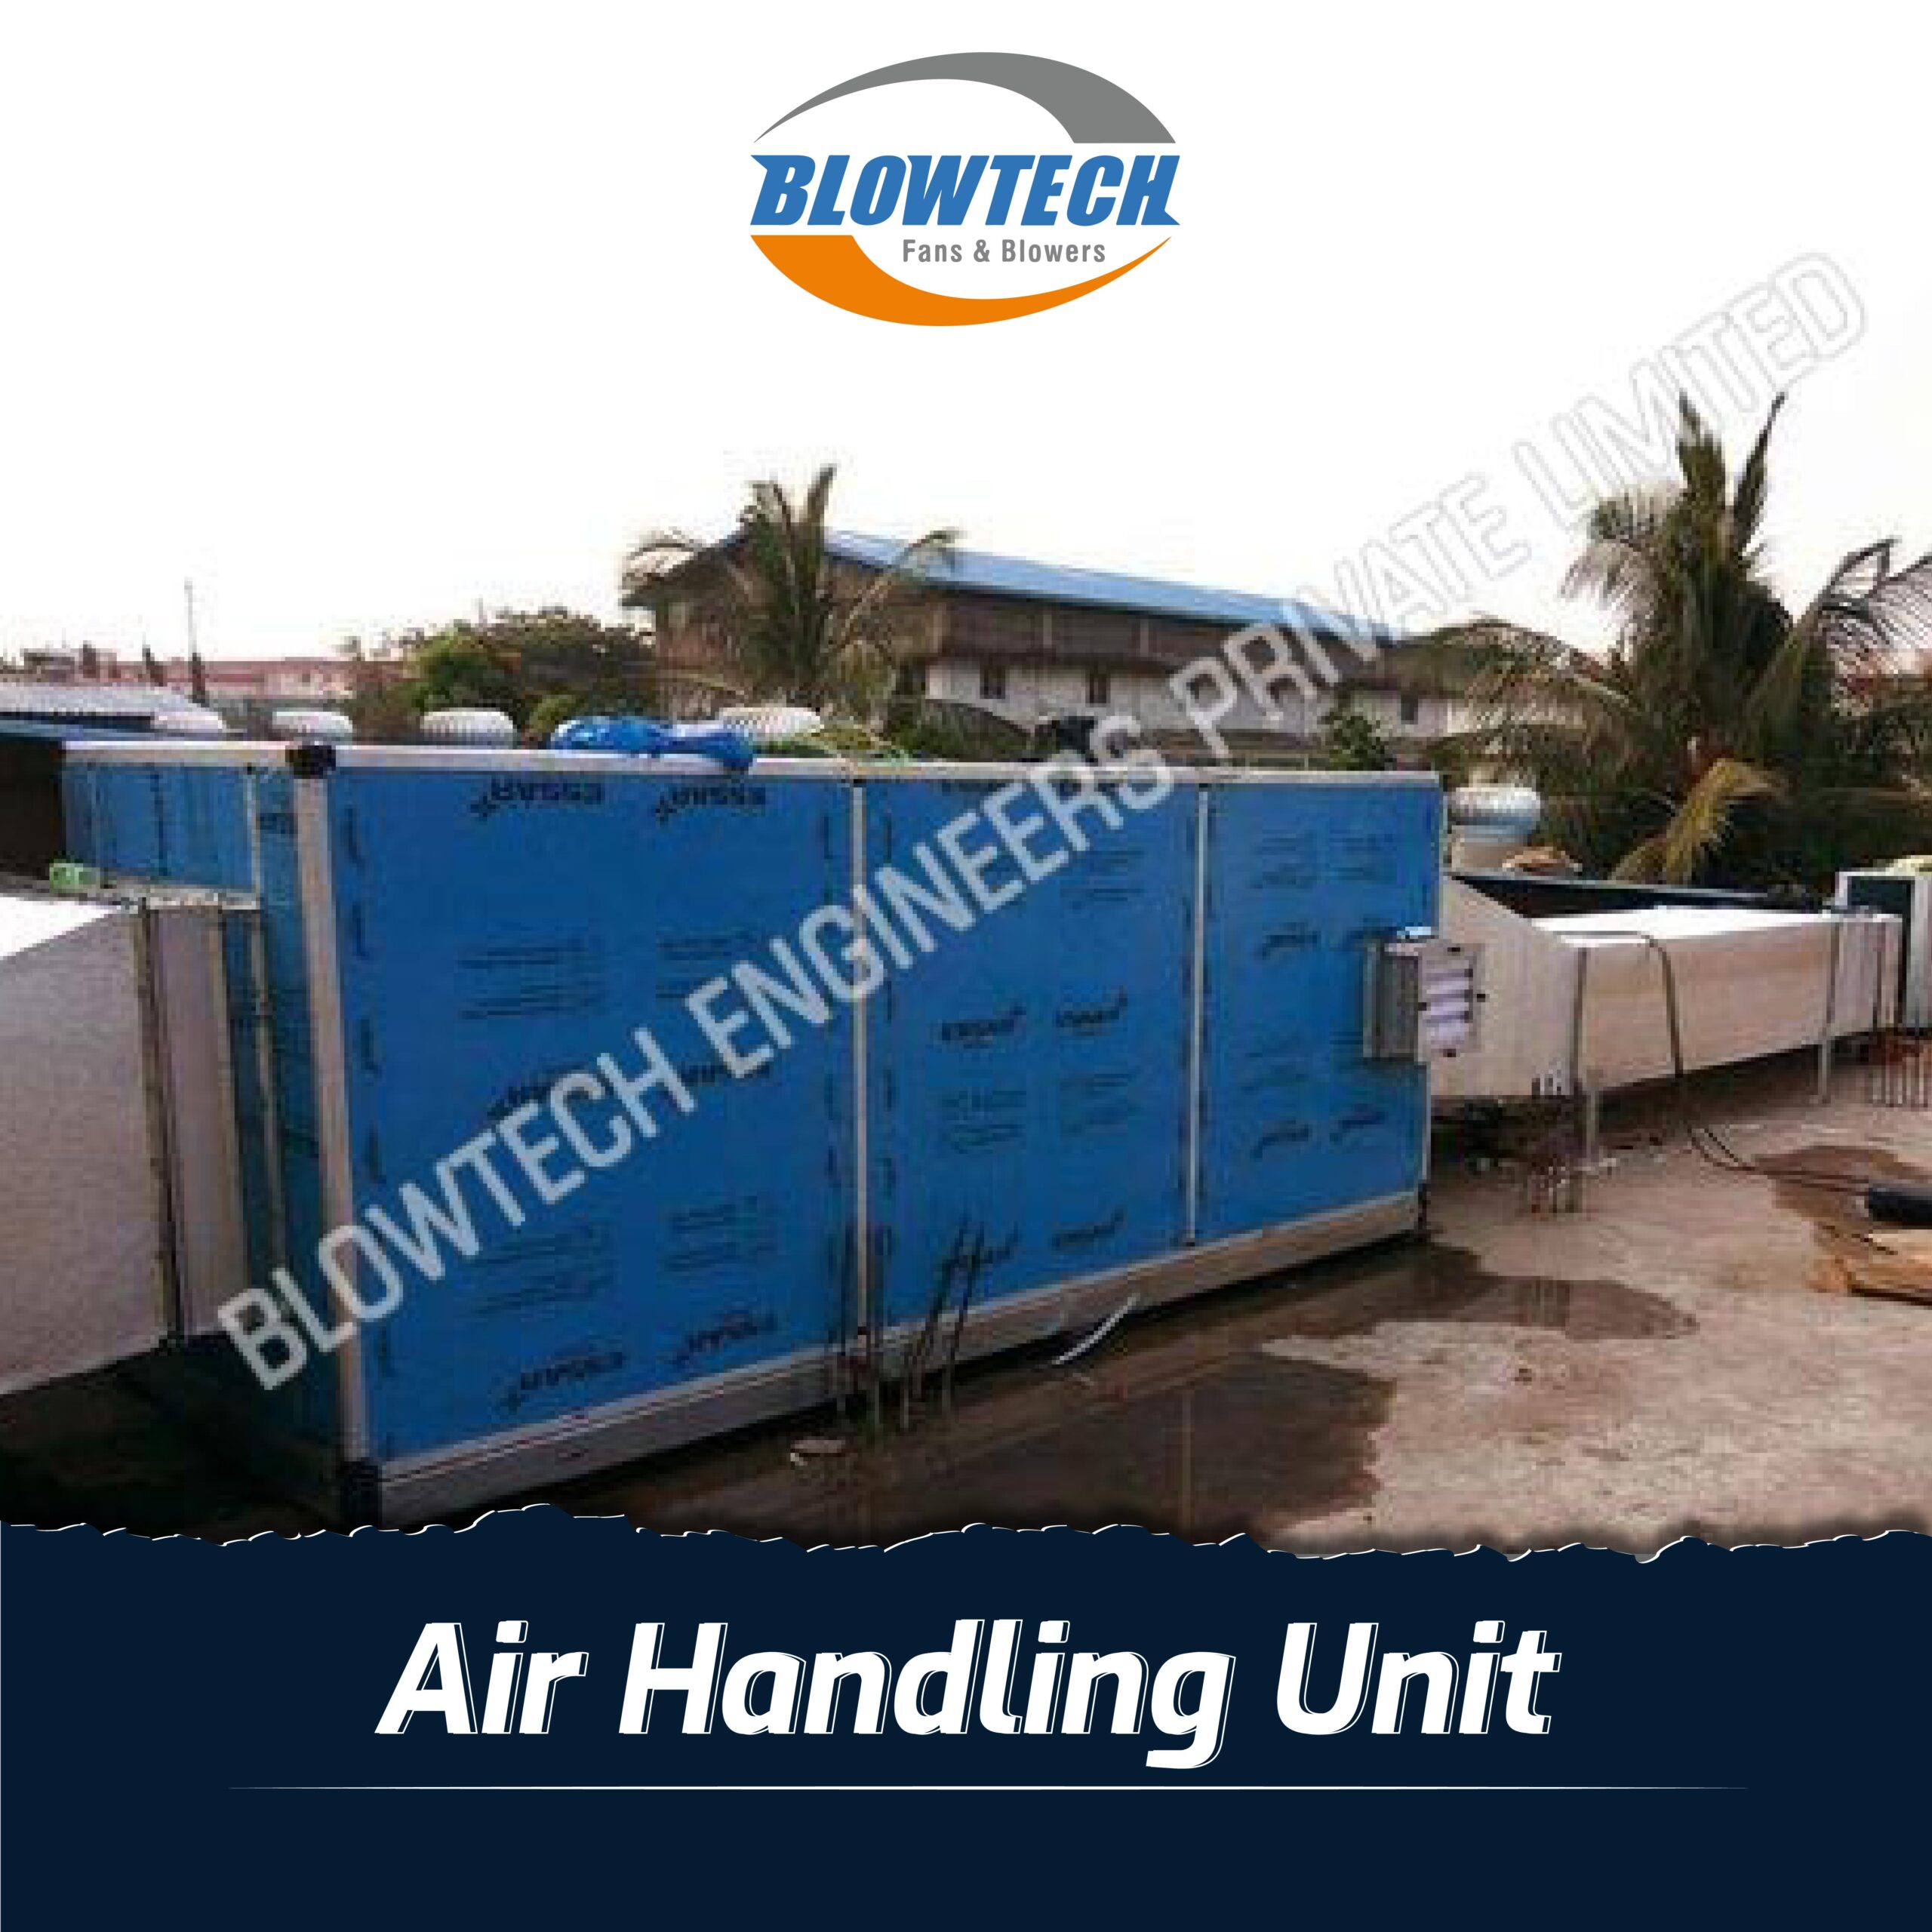 Air Handling Units  manufacturer, supplier and exporter in Mumbai, India